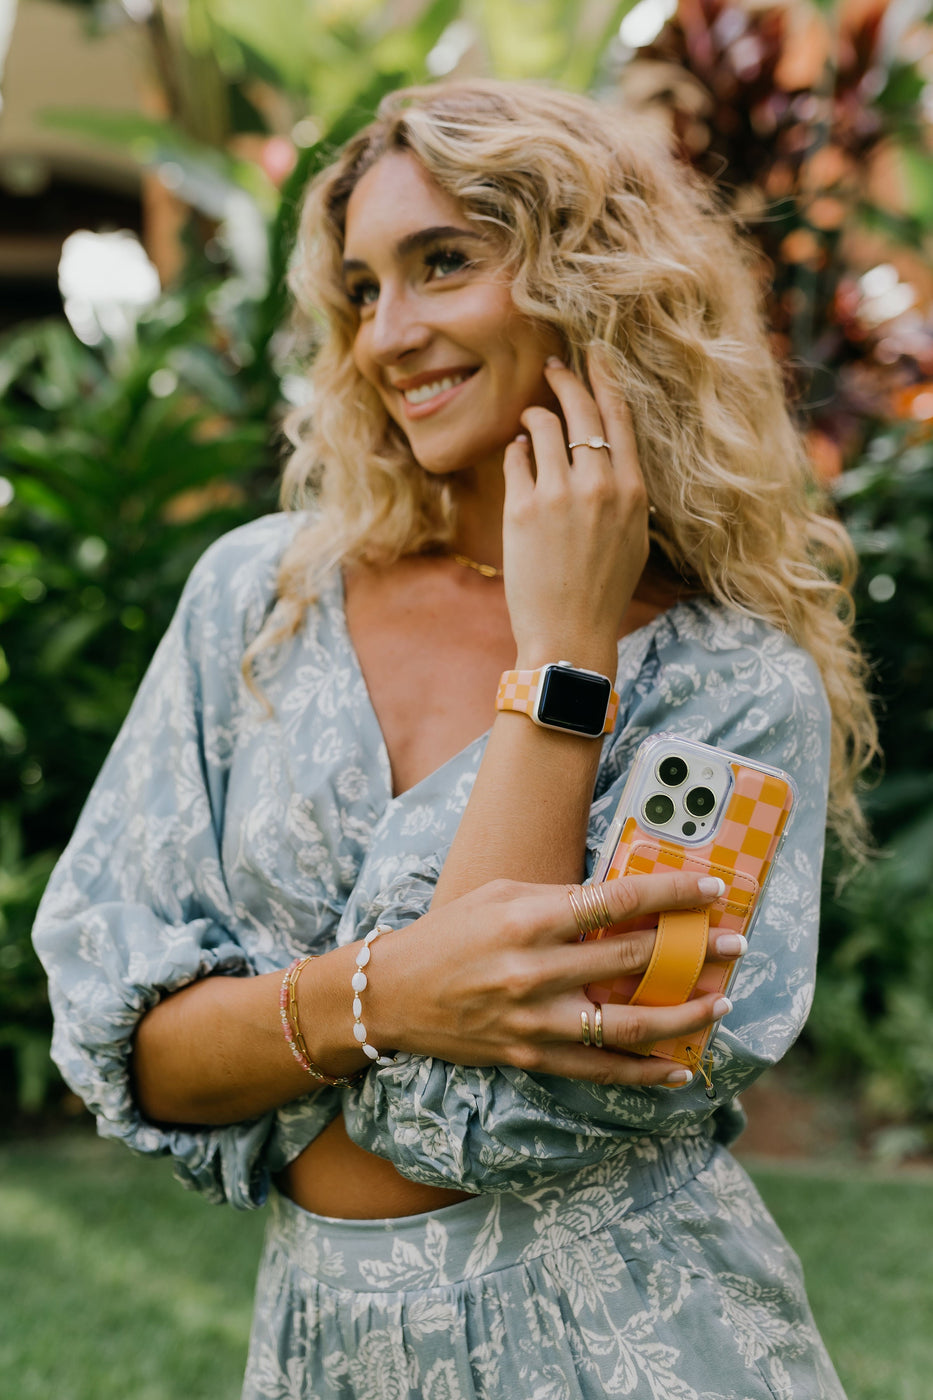 a woman holding a phone and smiling